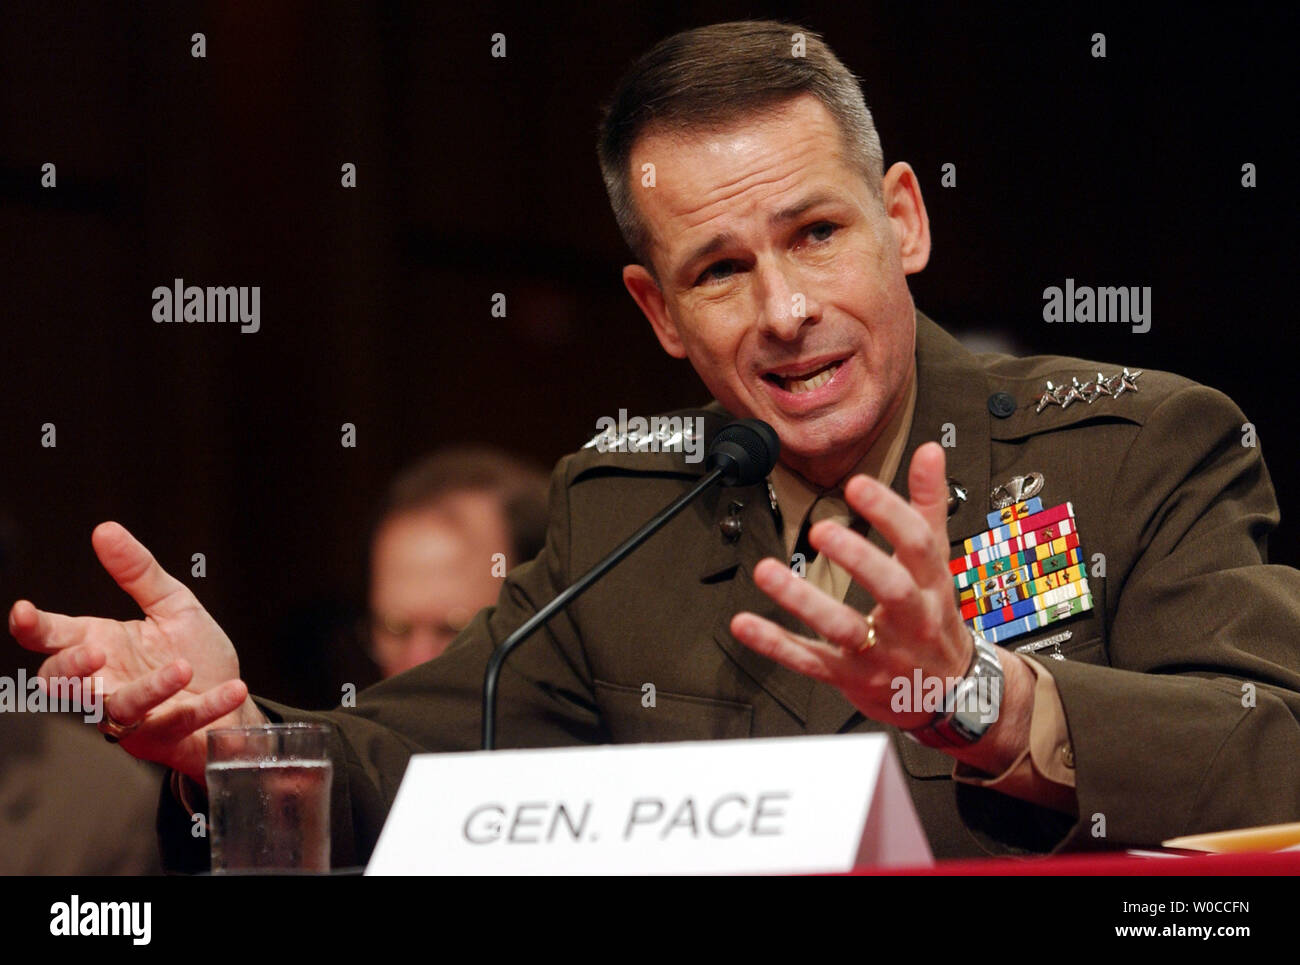 General Peter Pace testifies before the Senate Armed Service Committee on May 13, 2004 in Washington.  Pace and Deputy Secretary Wolfowitz are asking Congress for an additional $25 billion for the war in Iraq and Afghanistan. (UPI Photo/Michael Kleinfeld) Stock Photo